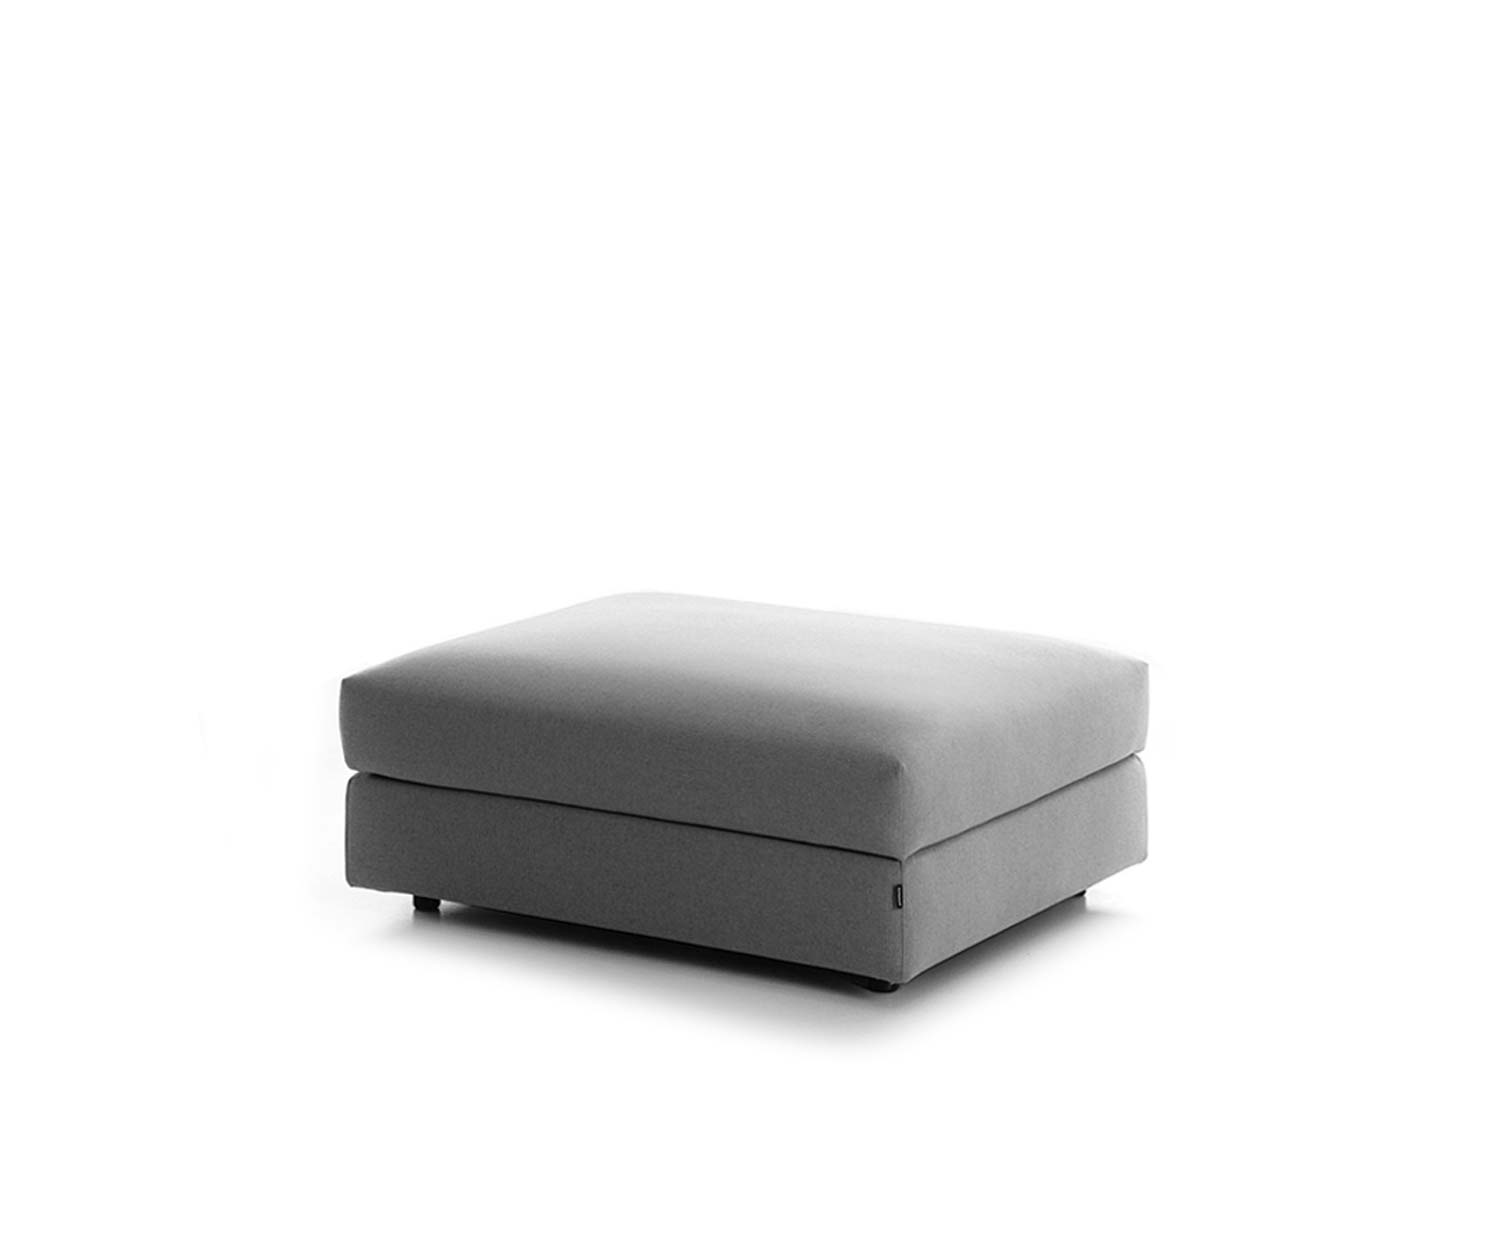 Modern Postoria Classic pouf with grey fabric cover